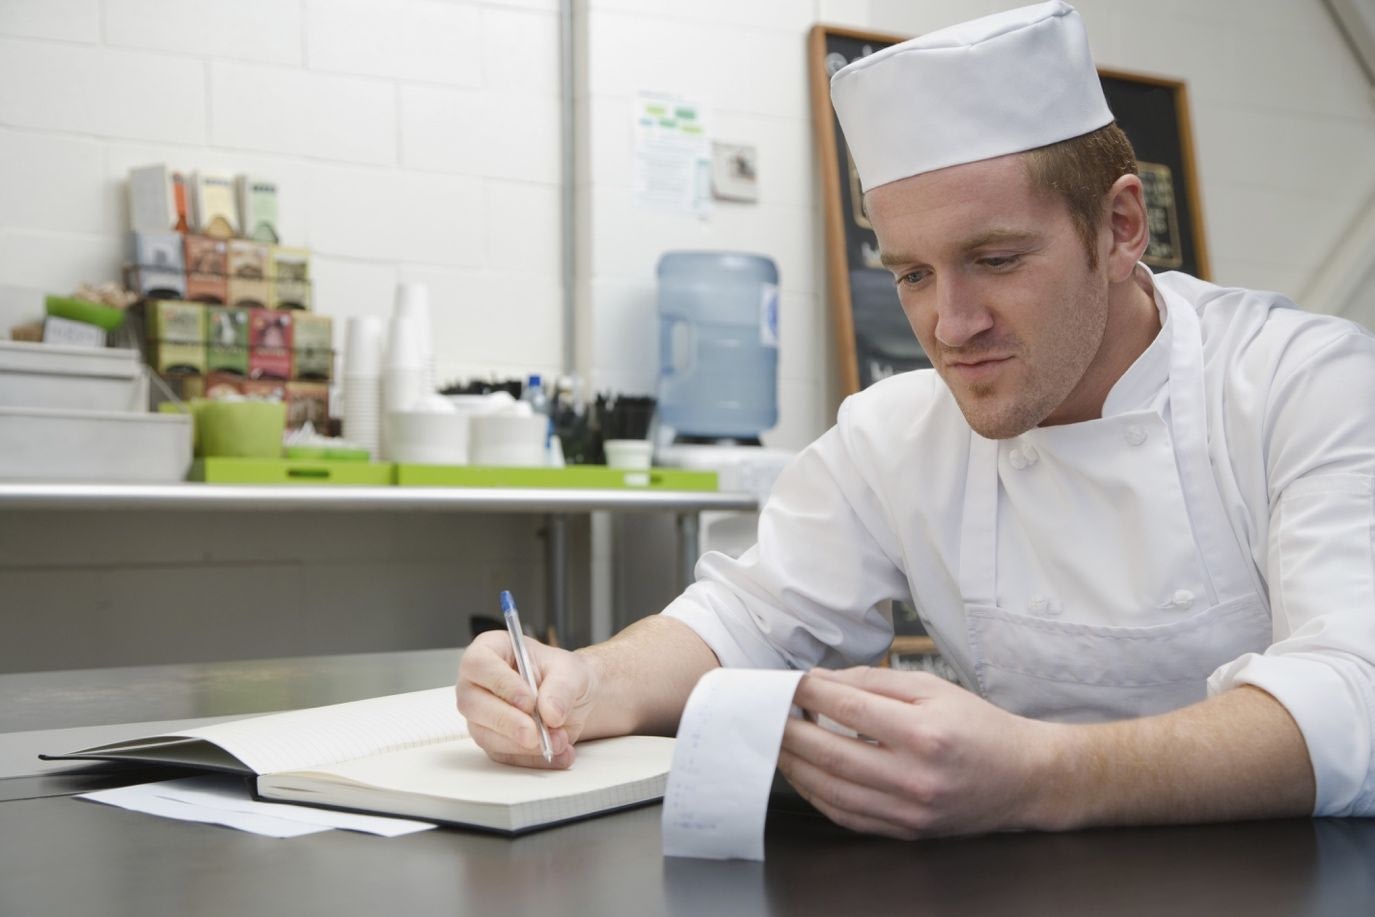 How to avoid downtime in your professional kitchen